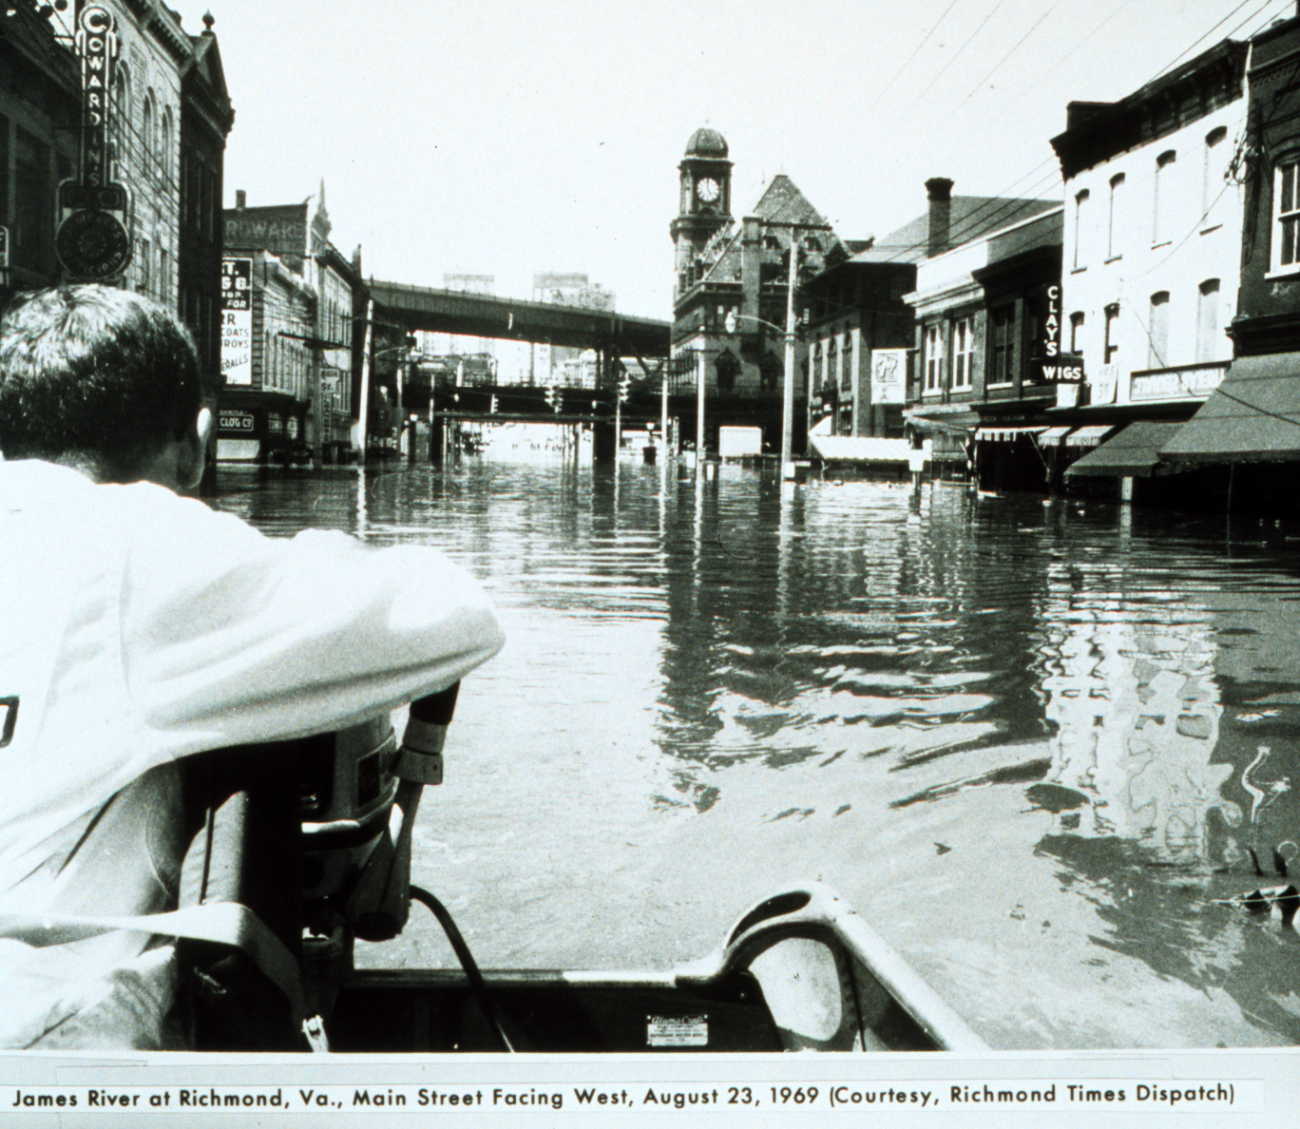 The remnants of Hurricane Camille still packed a powerful punchTraveling through the business district by boat